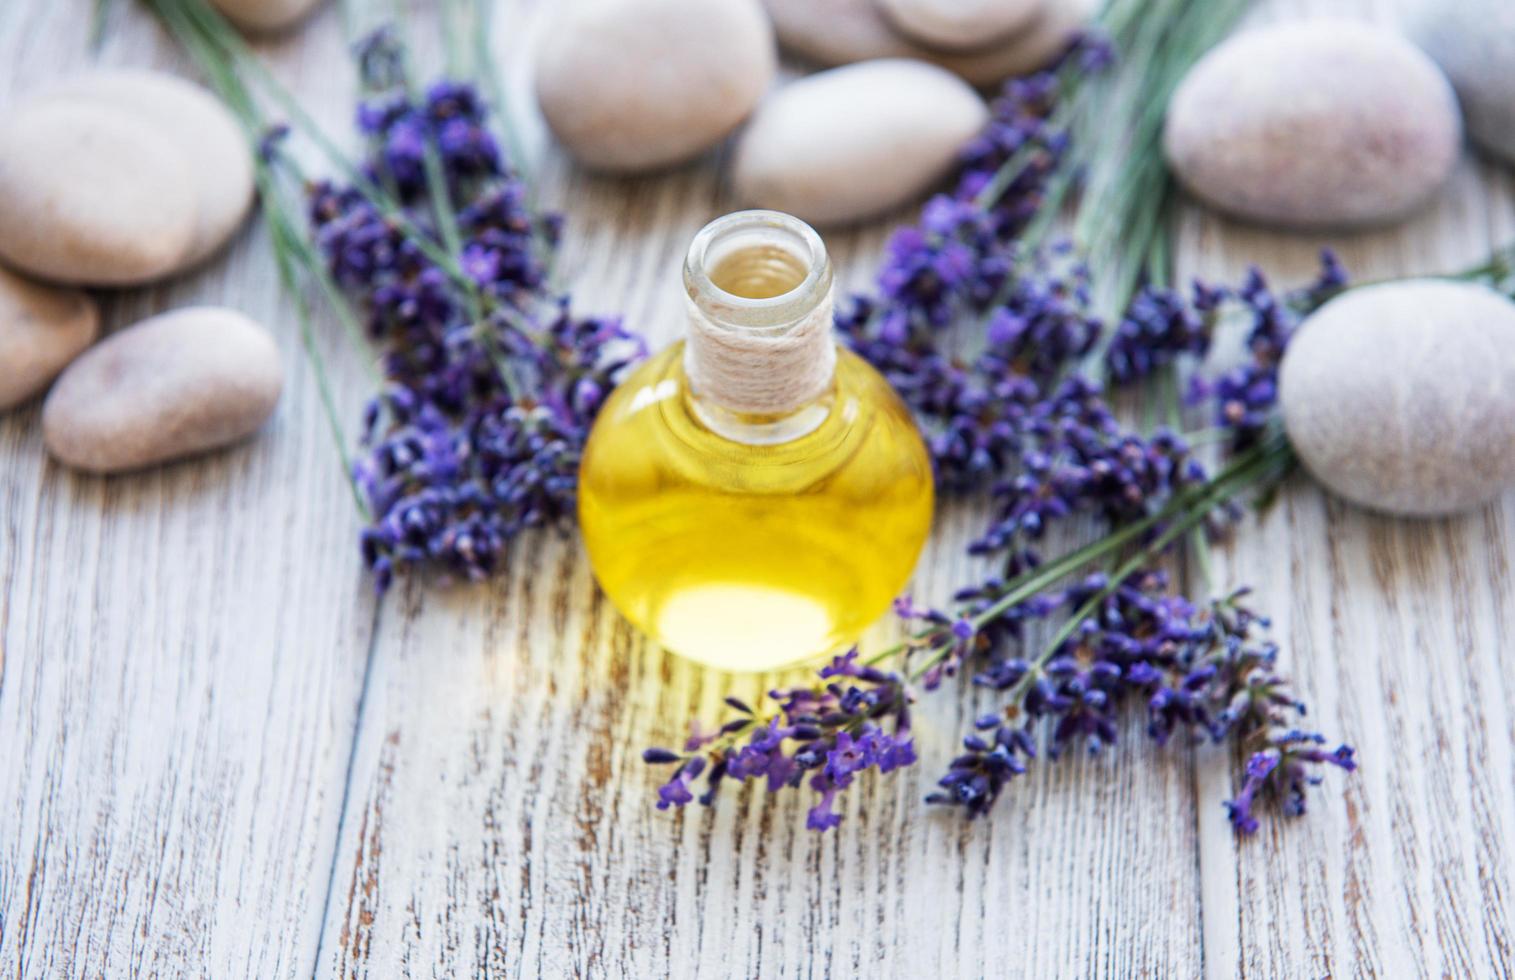 Lavender oil and lavender flowers photo